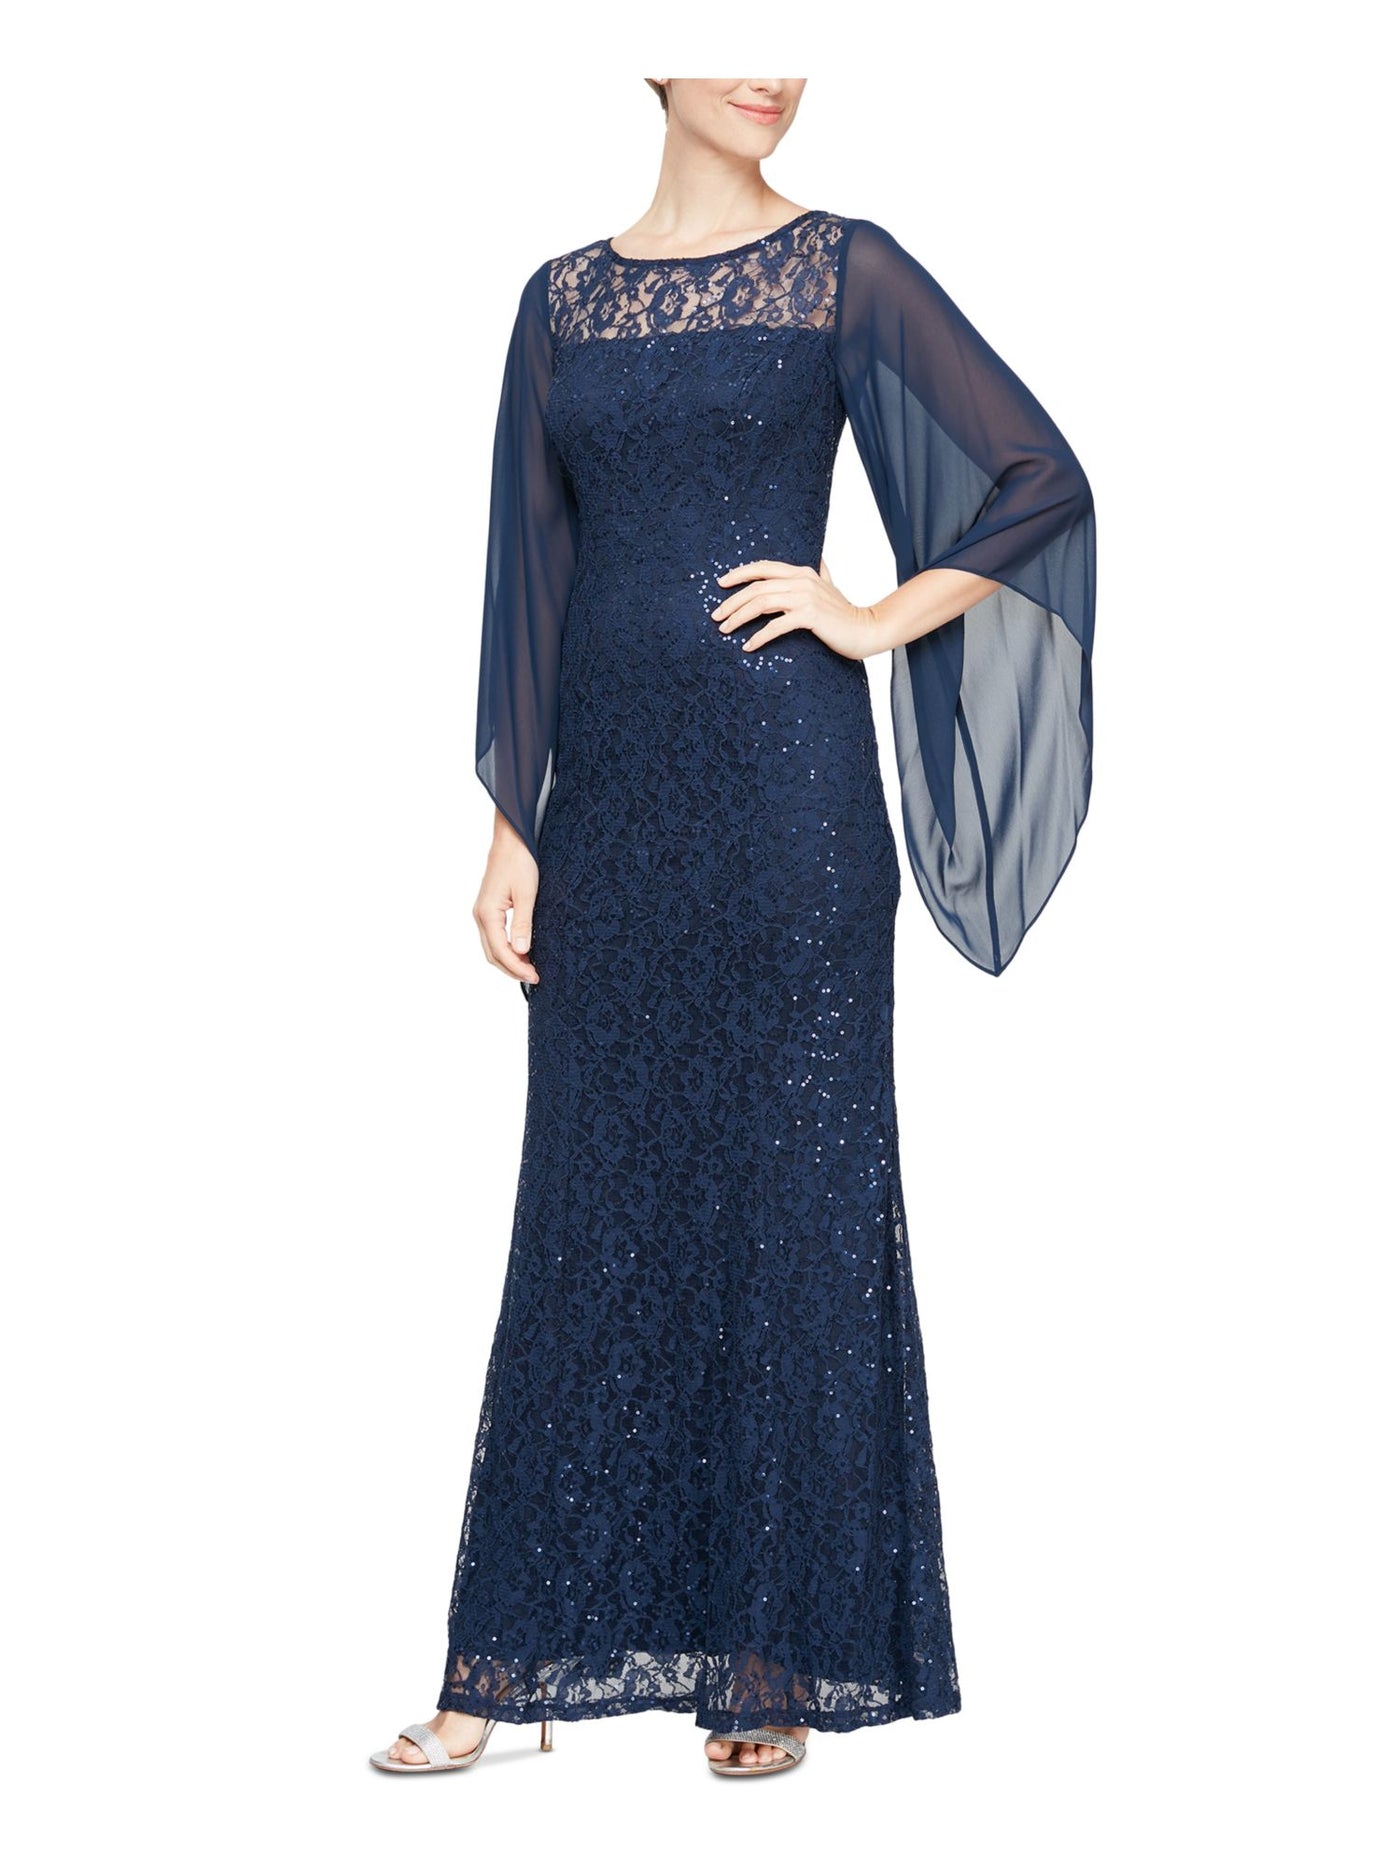 SLNY Womens Navy Sequined Zippered Keyhole Back Lined Sheer Long Sleeve Illusion Neckline Full-Length Evening Gown Dress 4